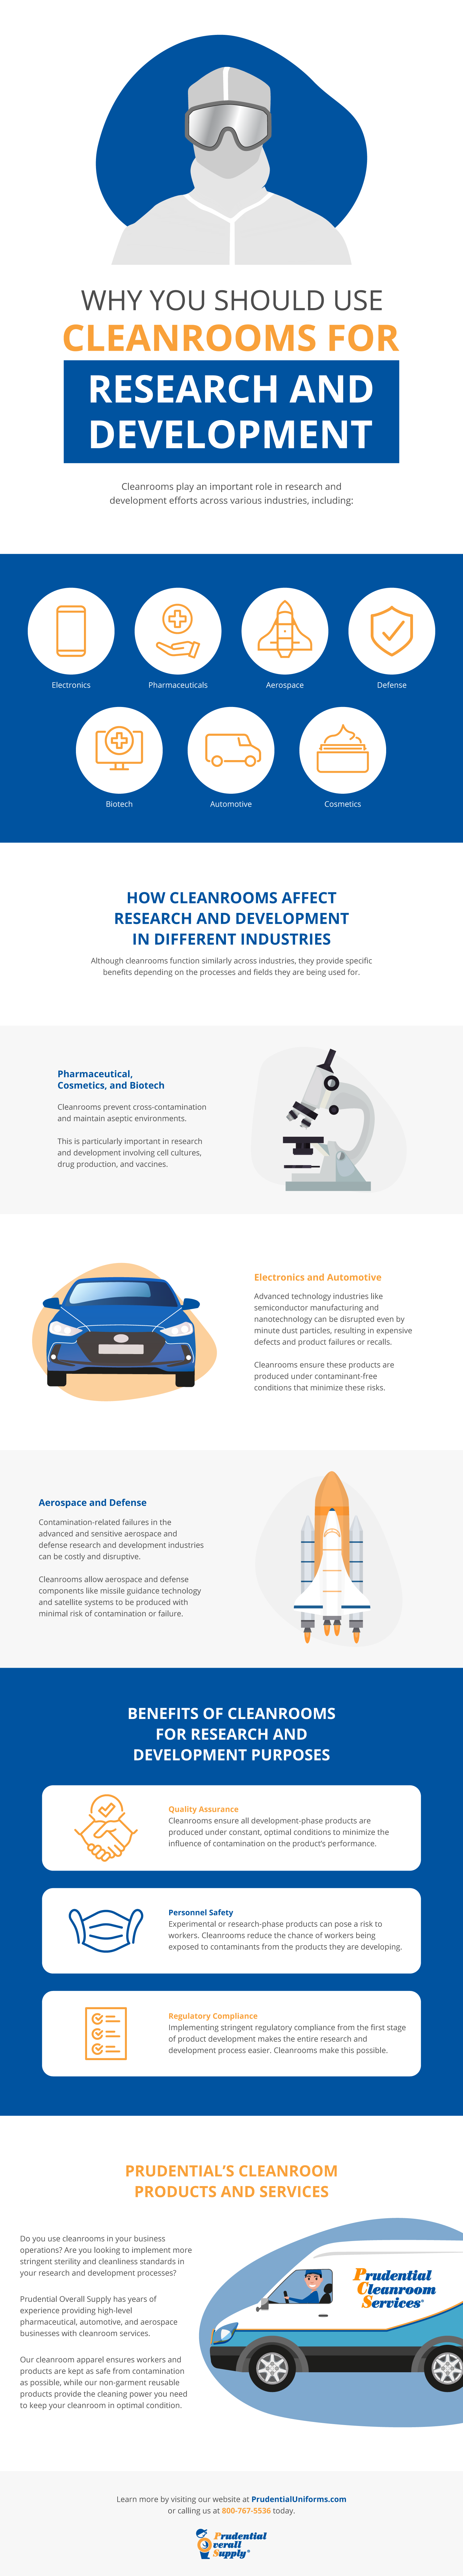 Cleanrooms for Research and Development Infographic